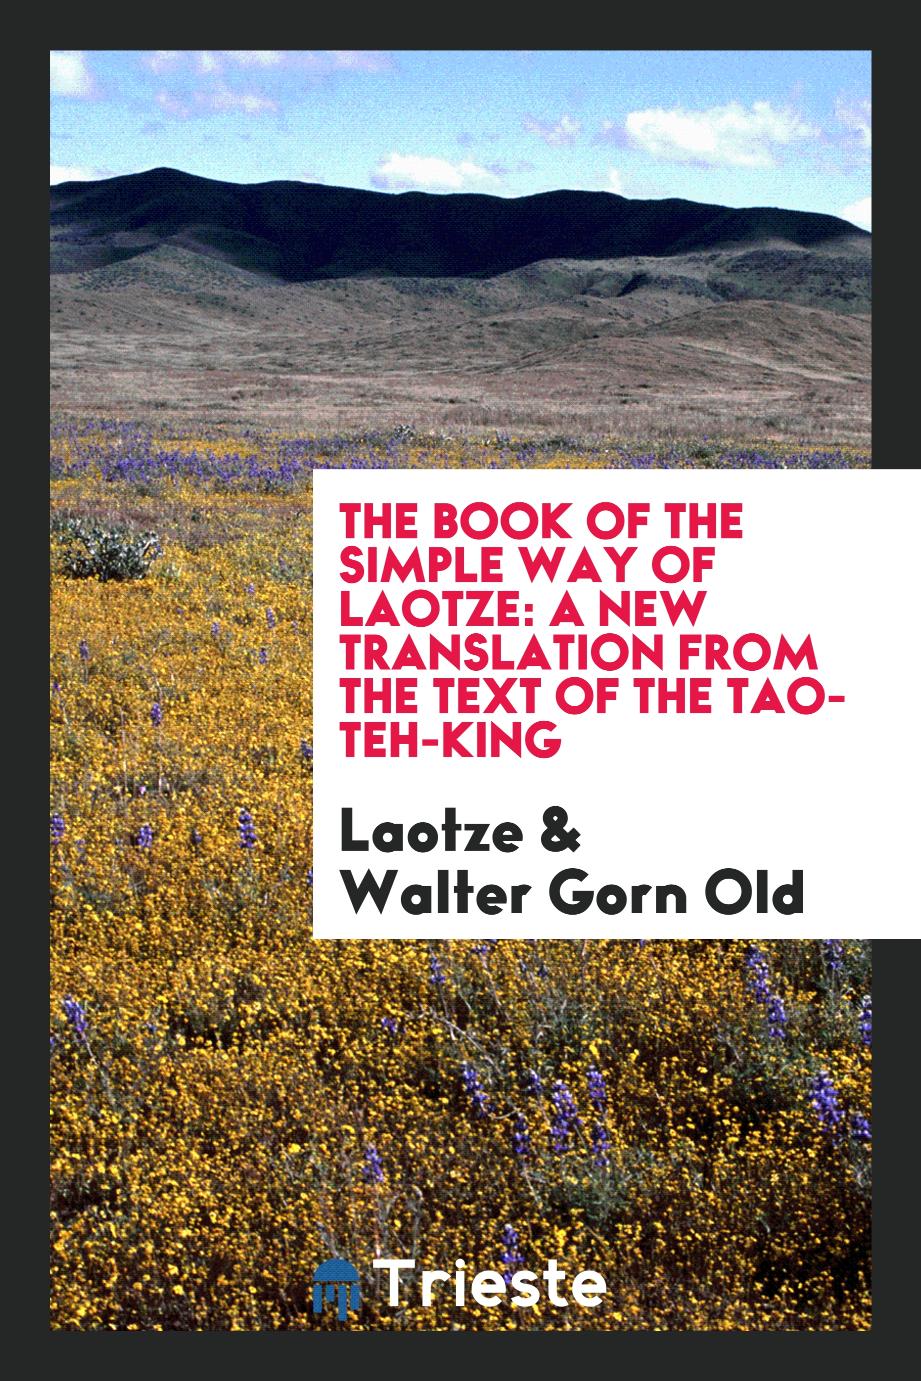 The book of the simple way of Laotze: a new translation from the text of the Tao-teh-king